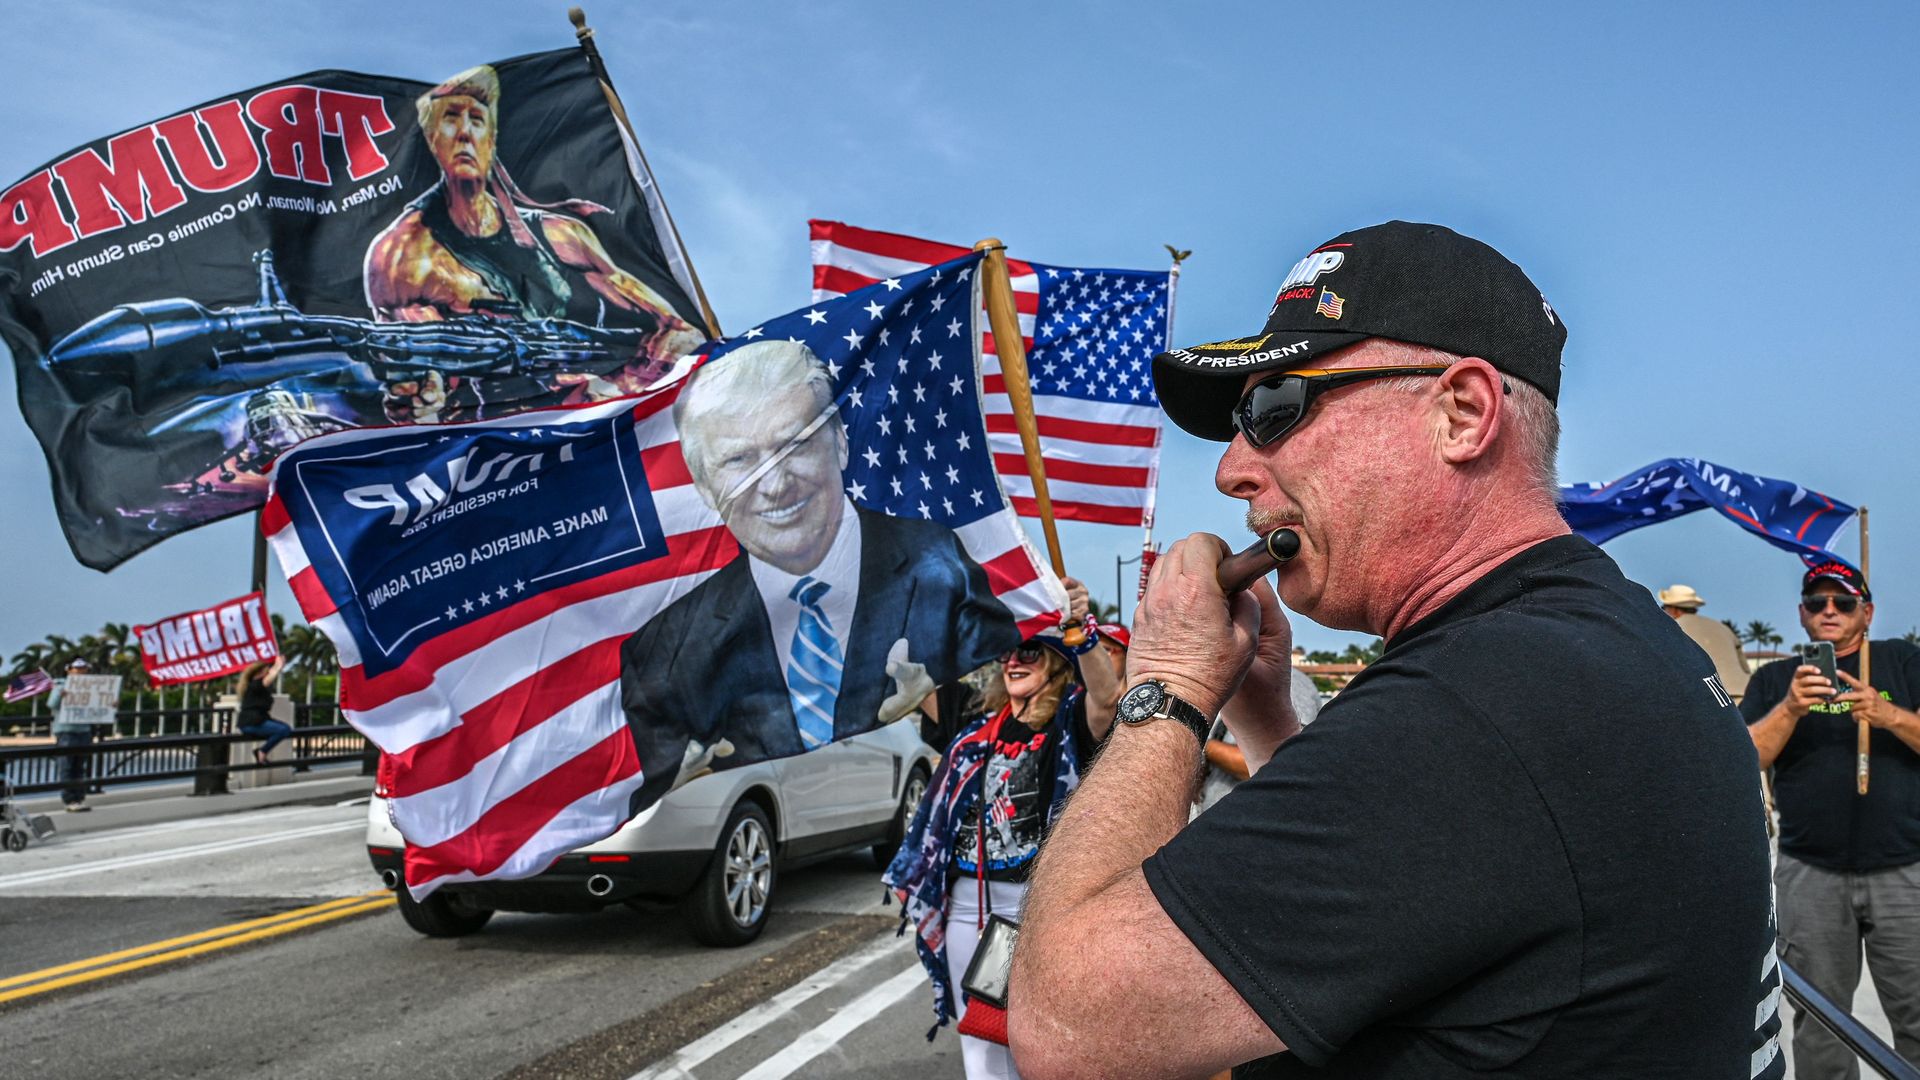 Trump supporters demonstrate near Mar-a-Lago yesterday.